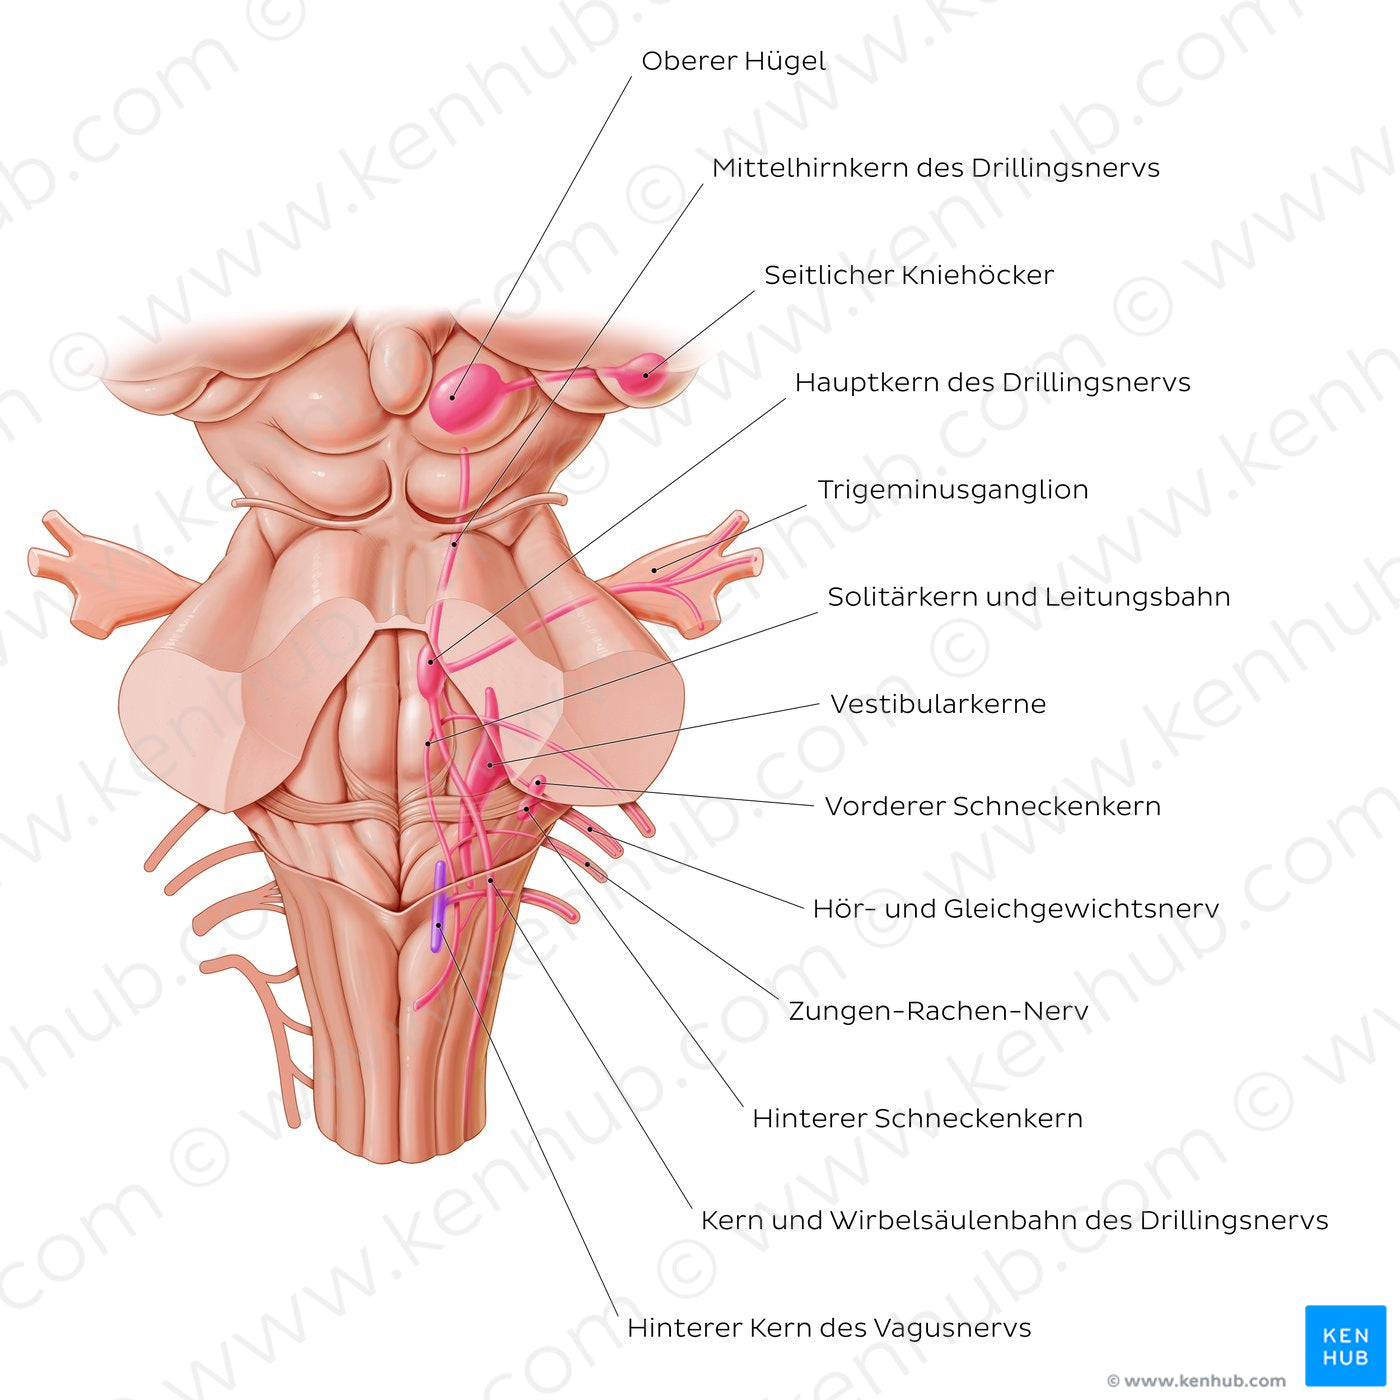 Cranial nerve nuclei - posterior view (afferent) (German)